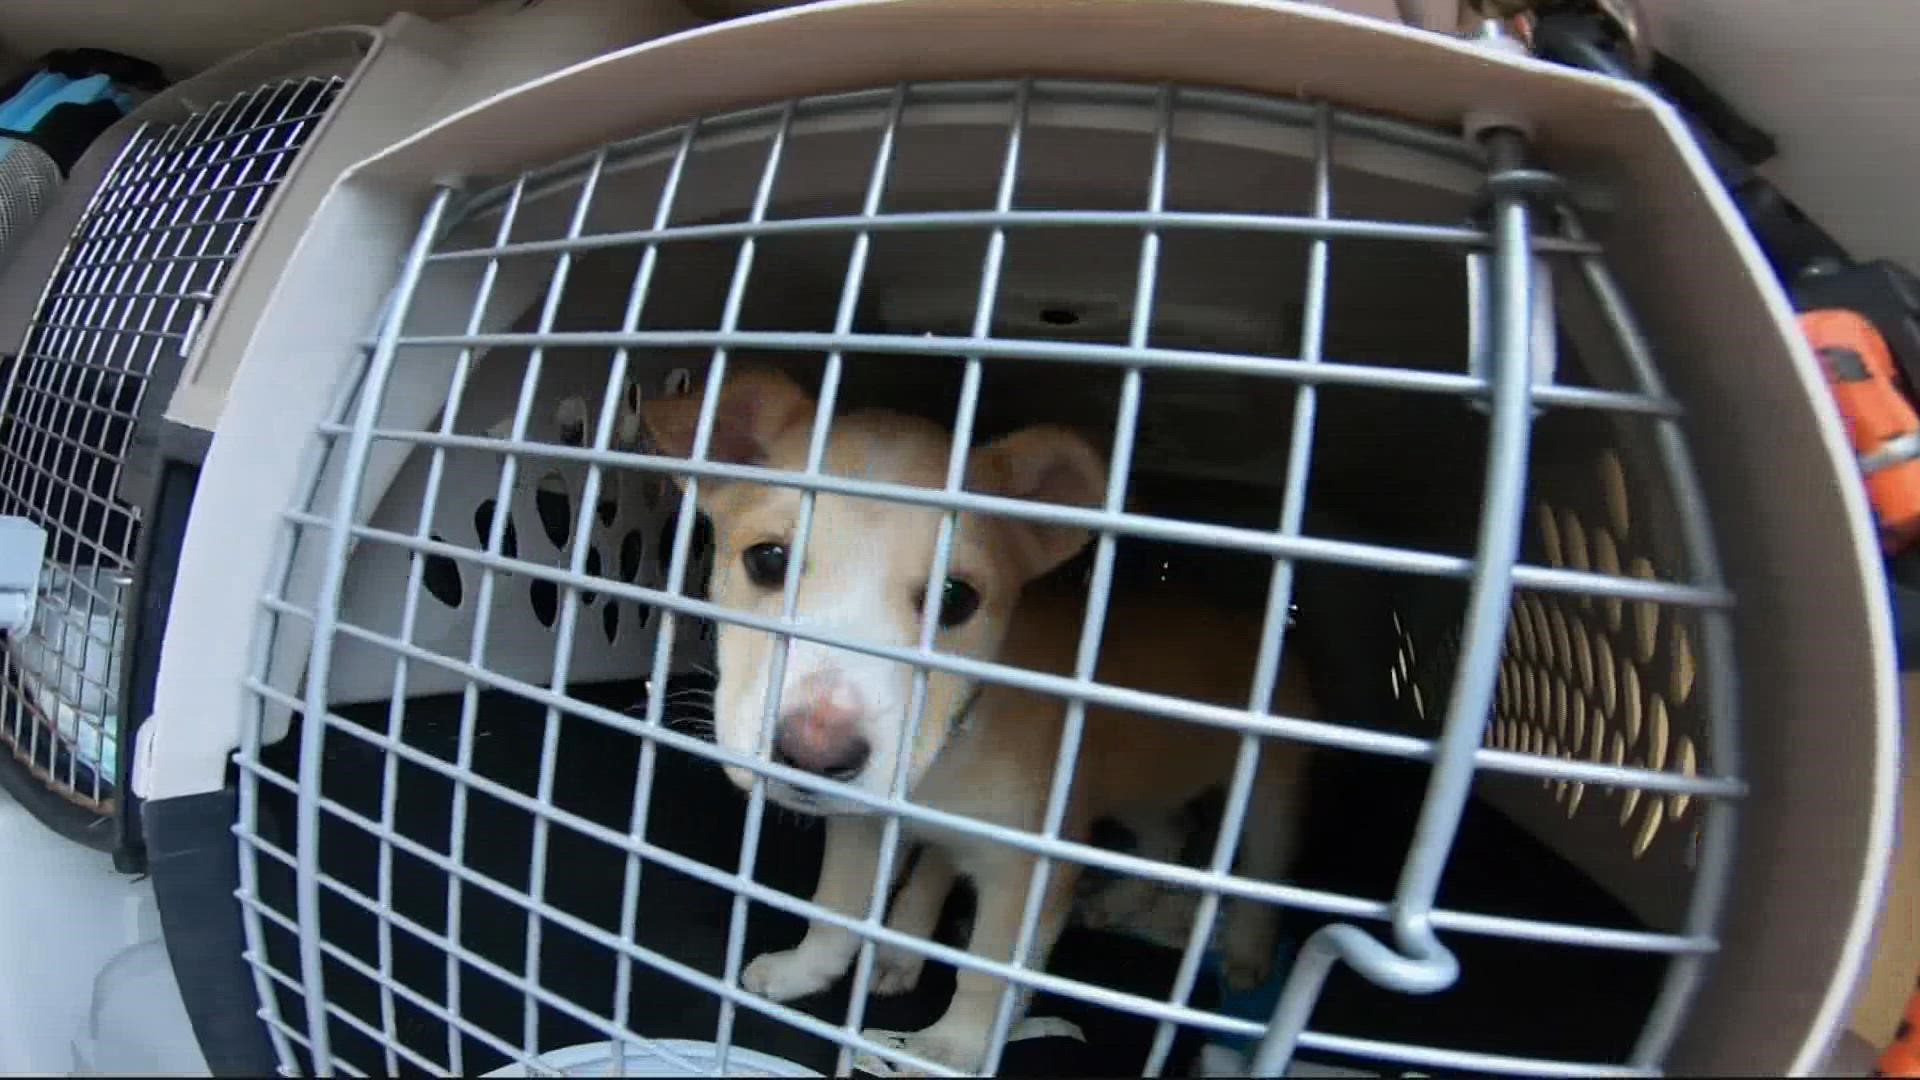 Twenty-eight dogs are coming to the Oregon Humane Society from a shelter near Bakersfield, Calif. The humane society hopes to find them forever homes in Portland.